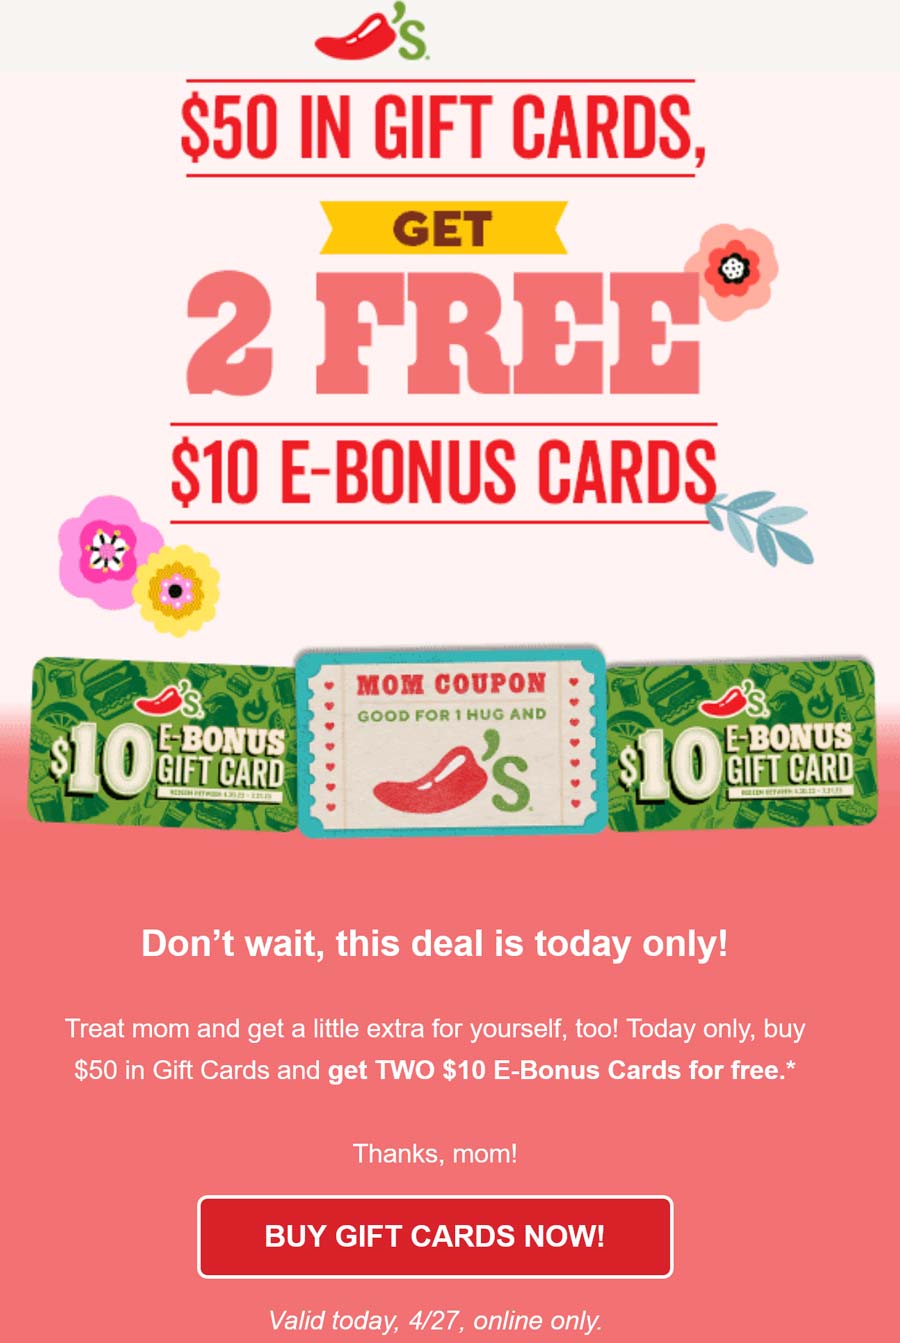 Chilis stores Coupon  $20 in cards free with $50 bought today at Chilis #chilis 